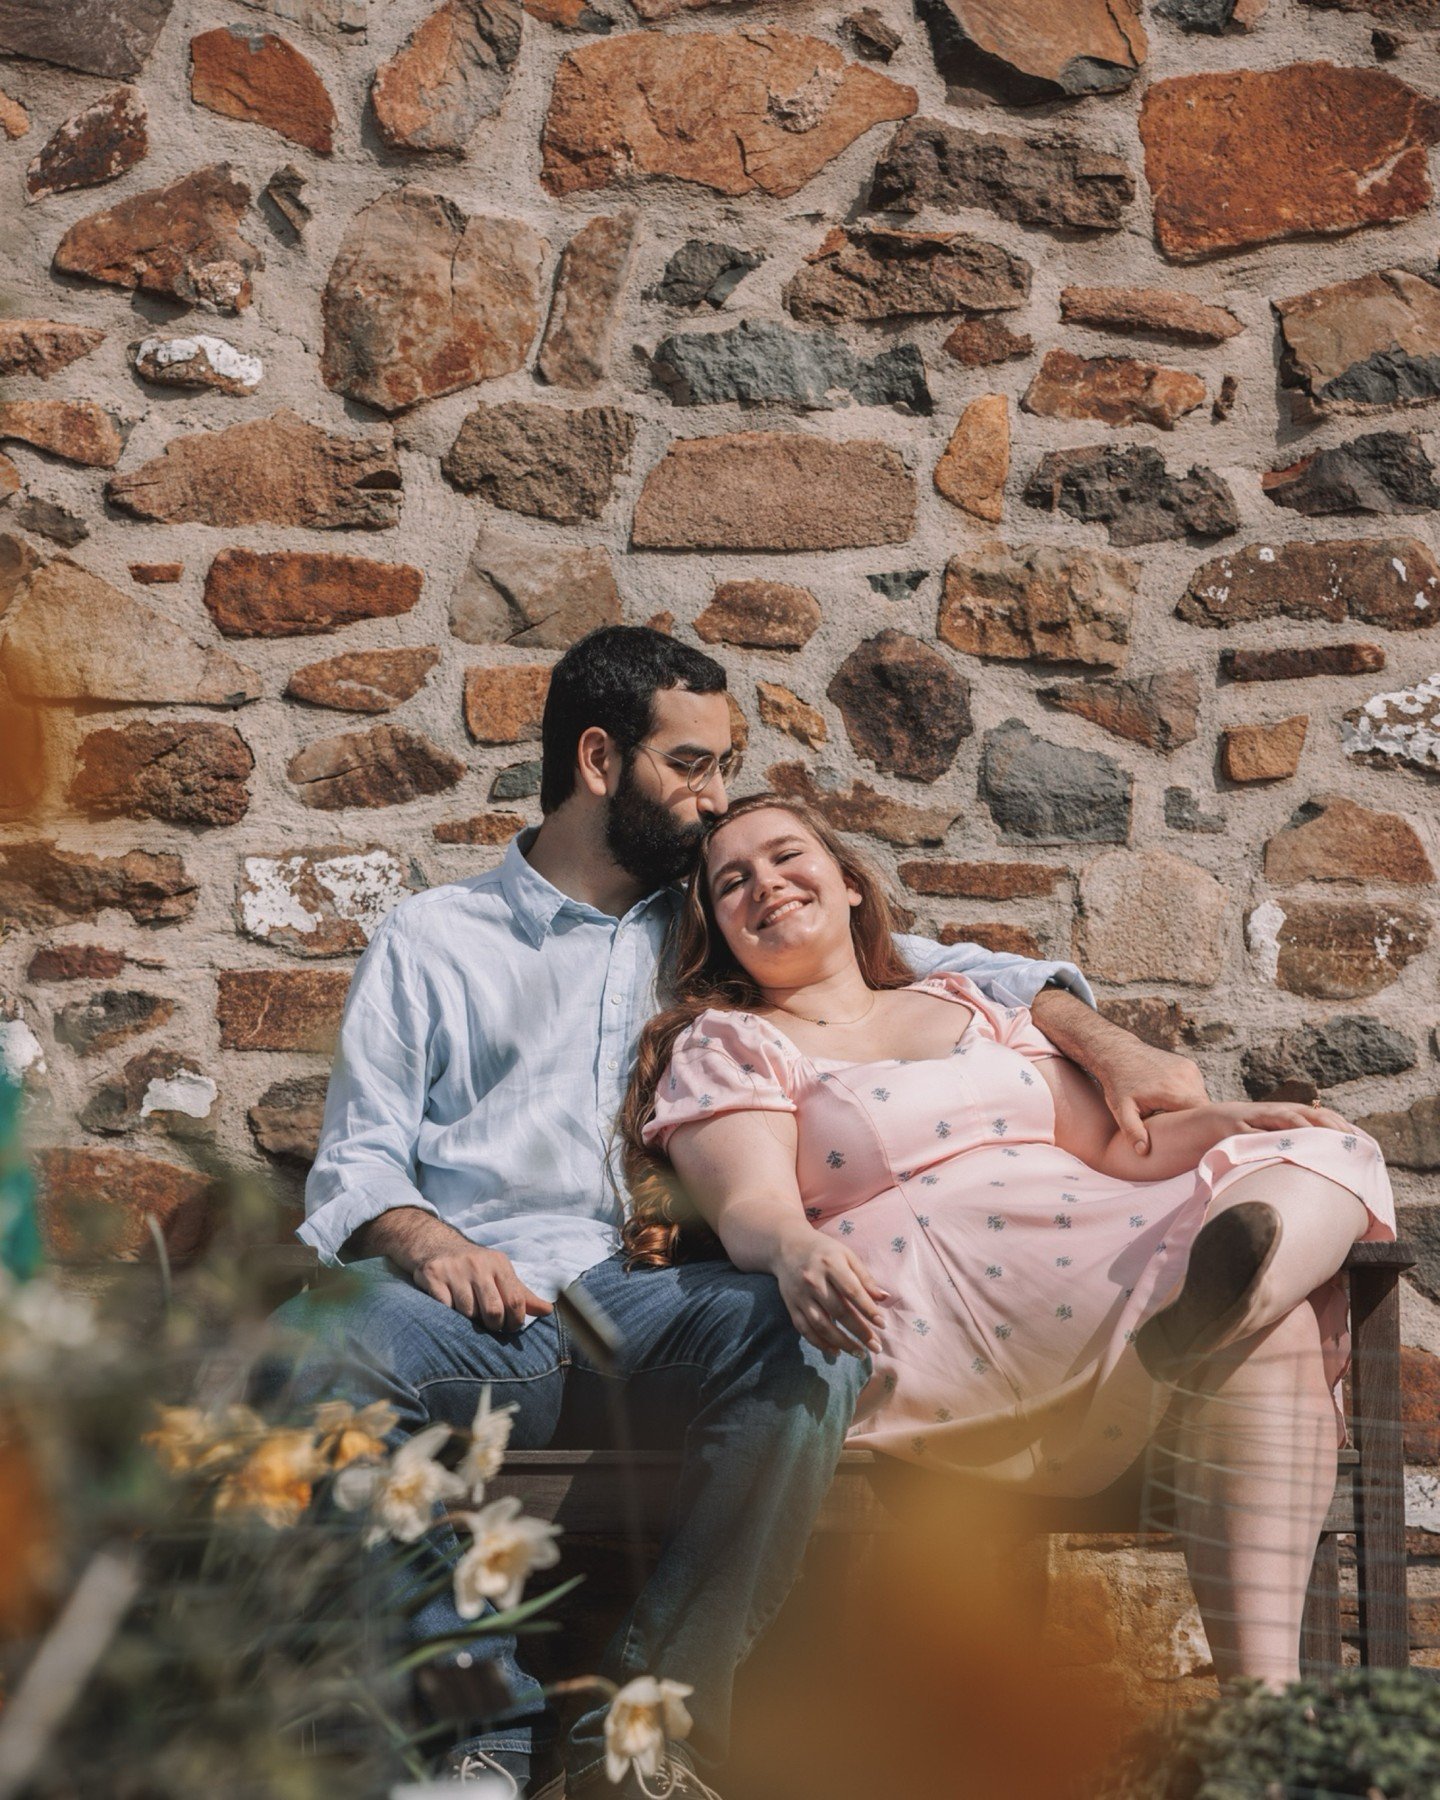 Nader &amp; Madison got engaged, and we got some gorgeous photos out of it. Win win!